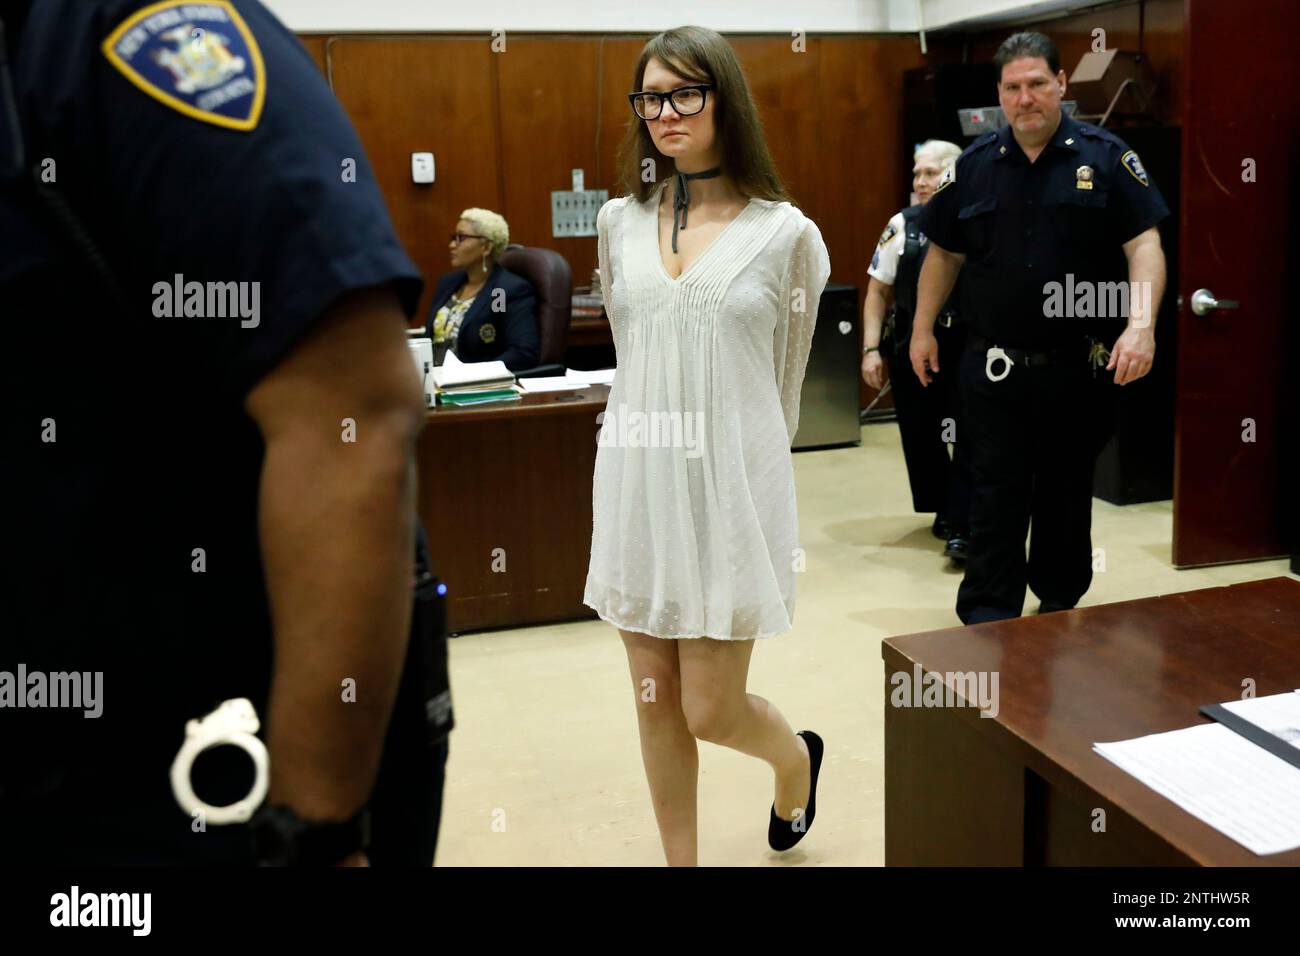 Anna Sorokin returns to court during her trial at New York State Supreme Court, in New York, Wednesday, April 24, 2019. Sorokin, who claimed to be a German heiress, is on trial on grand larceny and theft of services charges. (AP Photo/Richard Drew) Stock Photo